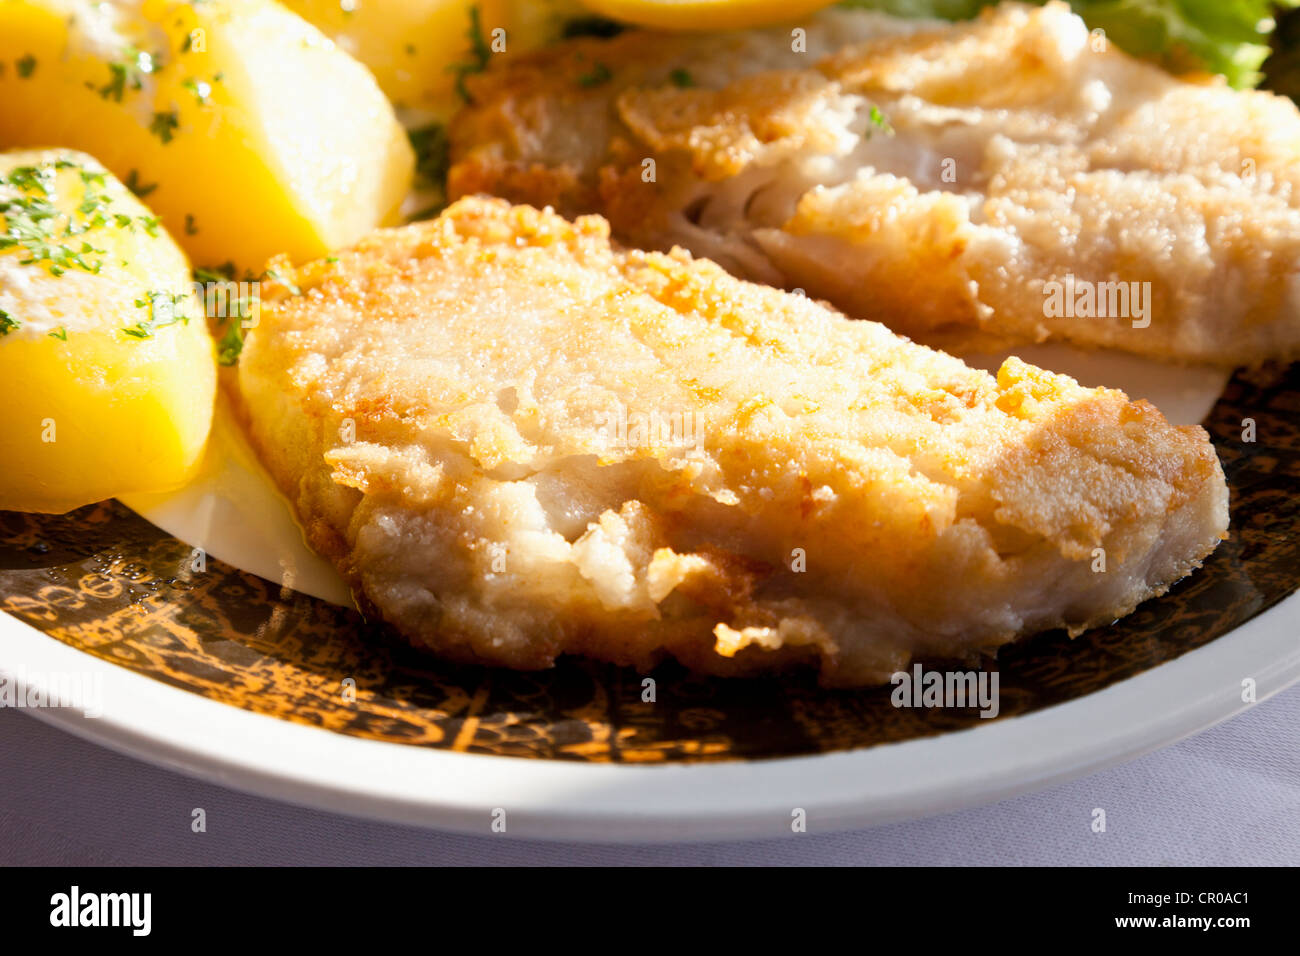 Redfish fillet in batter with boiled potatoes Stock Photo